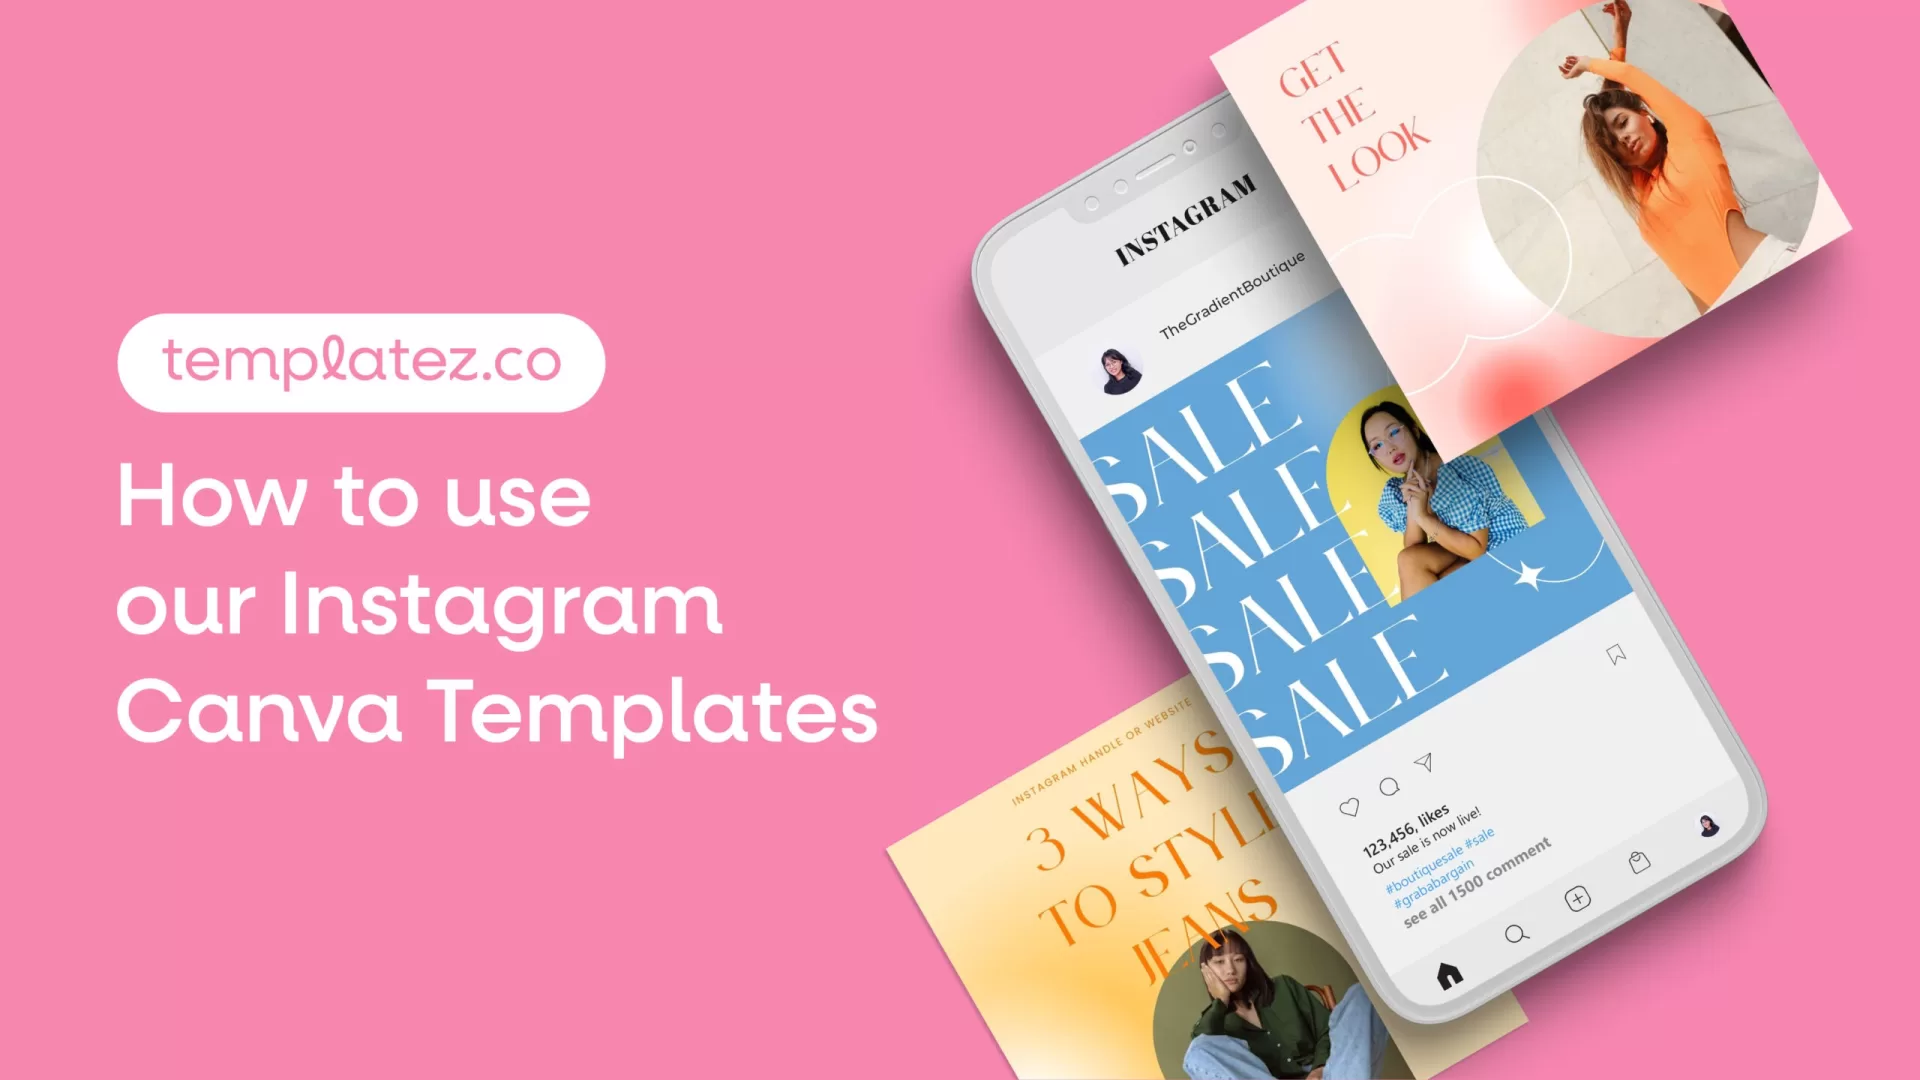 How to use our Instagram Canva Templates